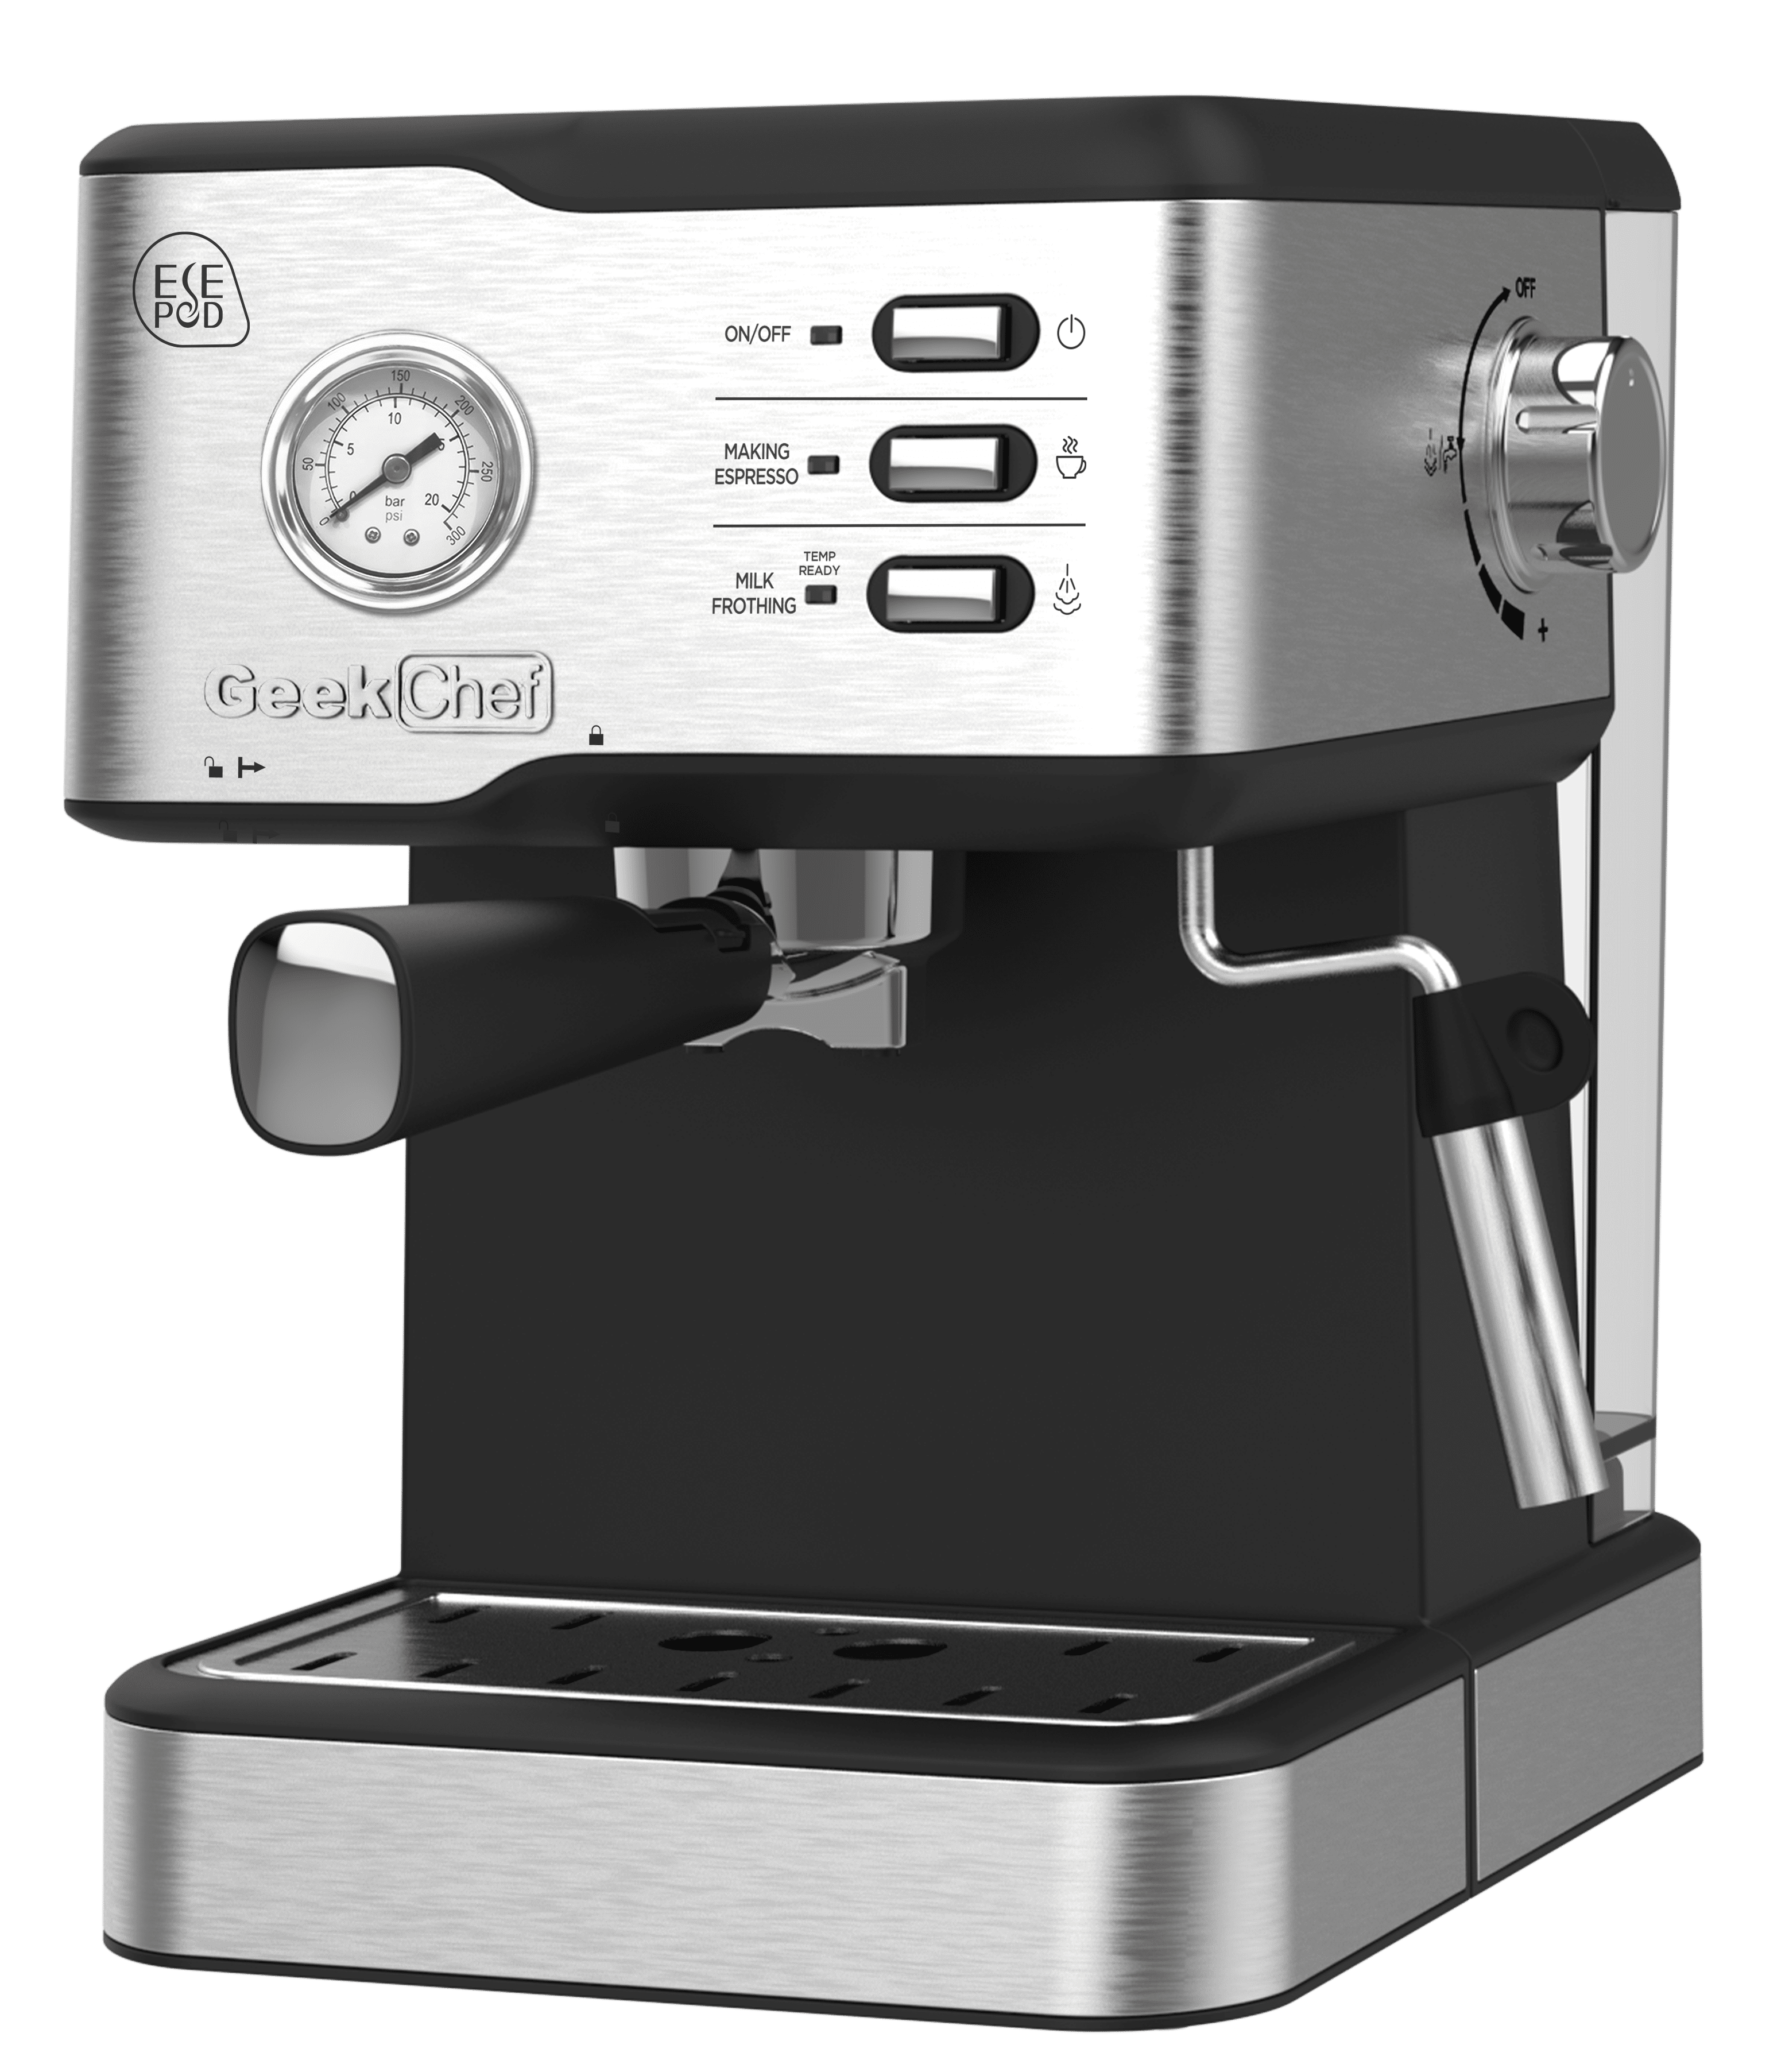 Elexnux 2-Cup Black 20 Bar Professional Compact Espresso Machine with Milk Frother  Steam Wand Thermal Fast Heating System GBK-F20D - The Home Depot